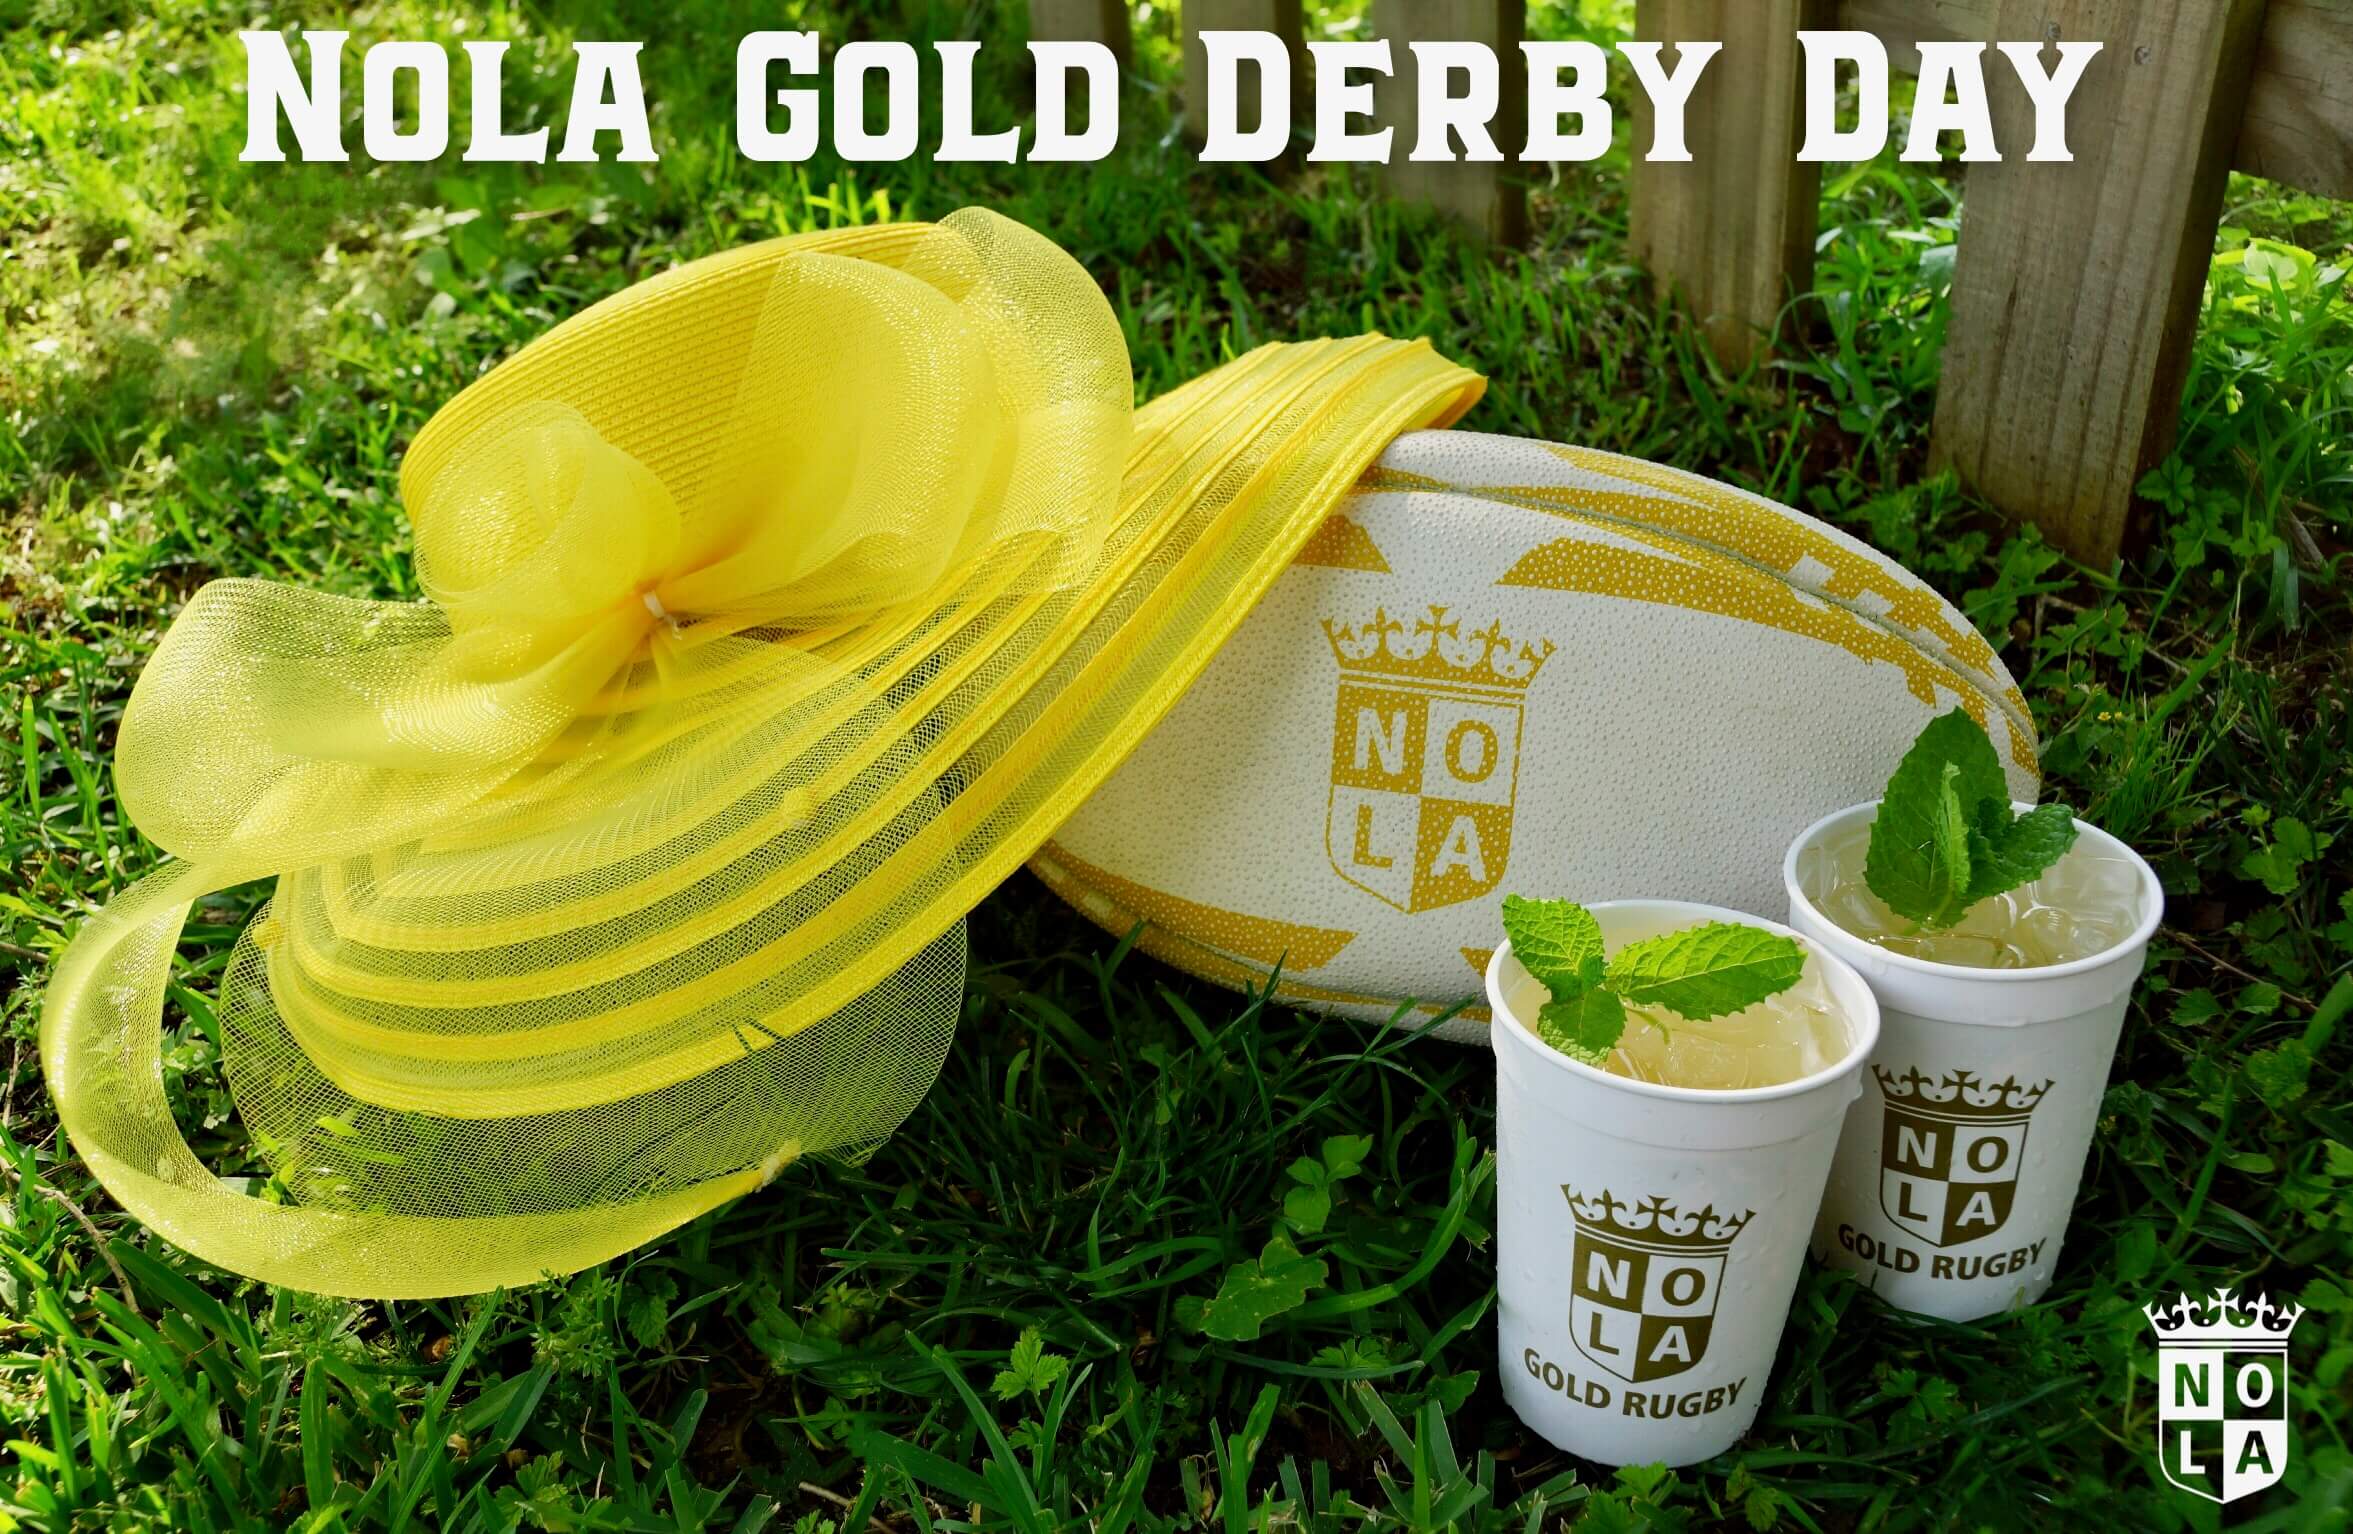 Celebrate Derby Day at Gold Stadium this Saturday, May 4th!